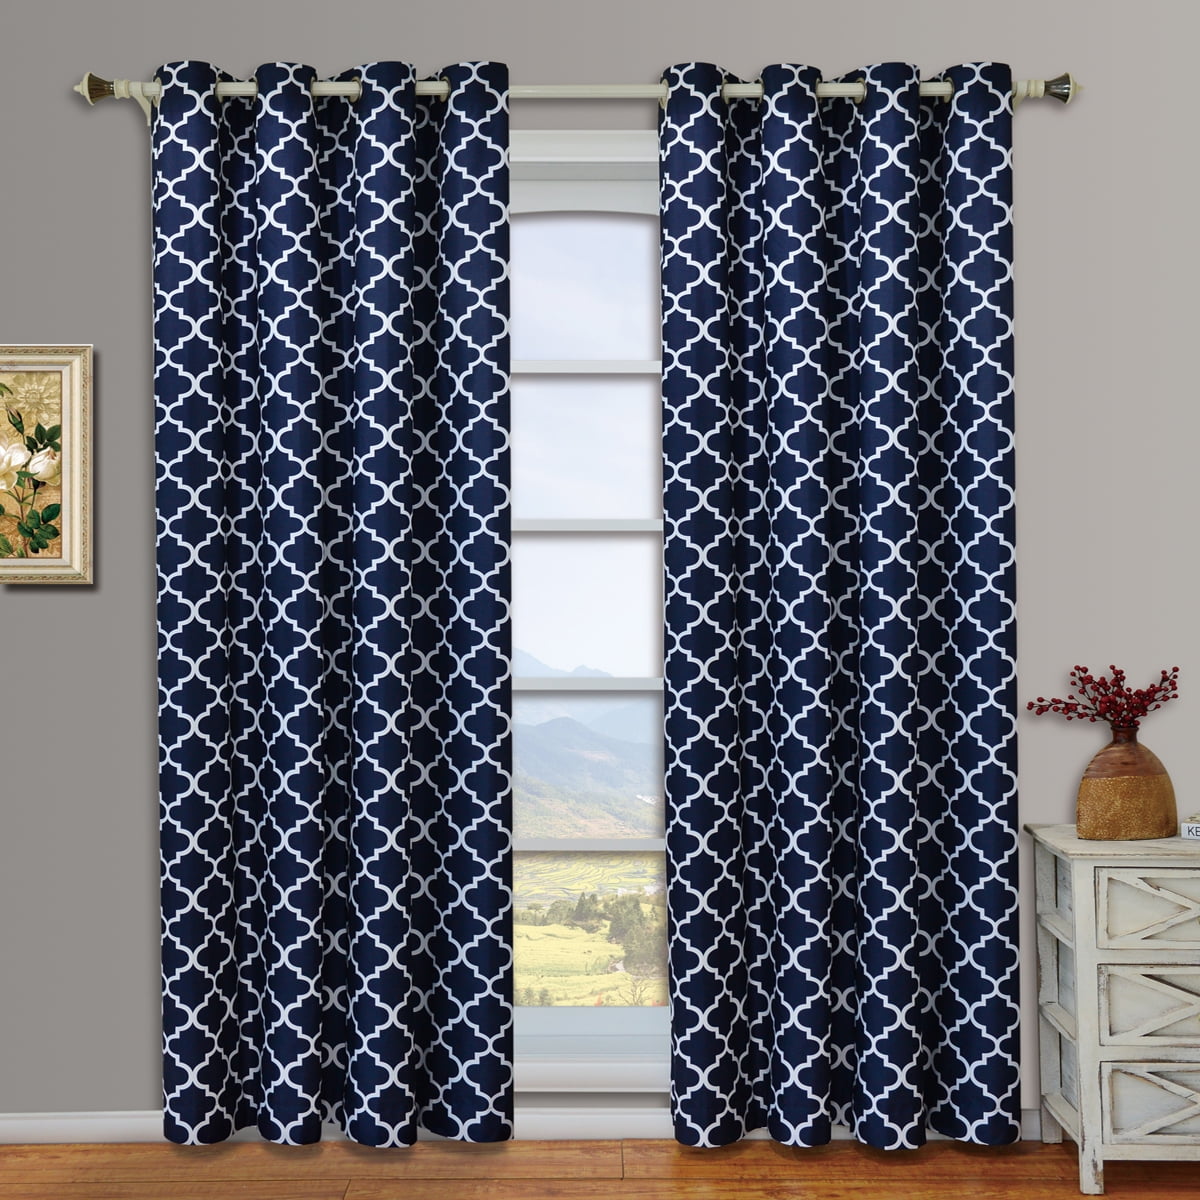 Chevron Striped Eyelet/Ring Top Lined Curtain Pairs By Hamilton McBride-TO CLEAR